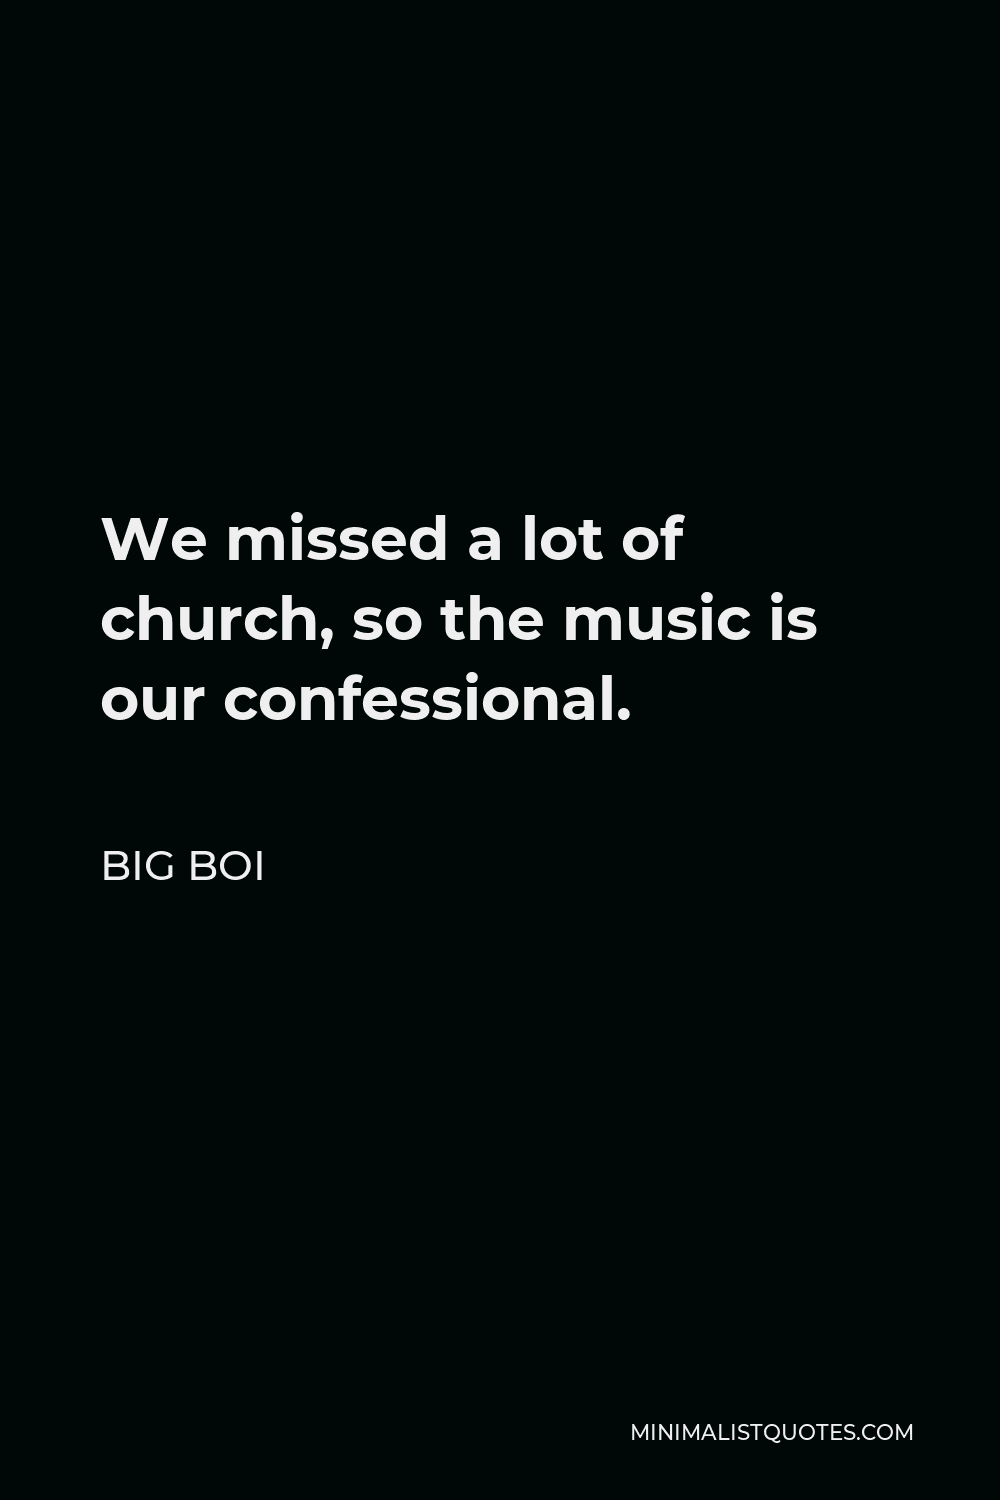 Big Boi Quote - We missed a lot of church, so the music is our confessional.